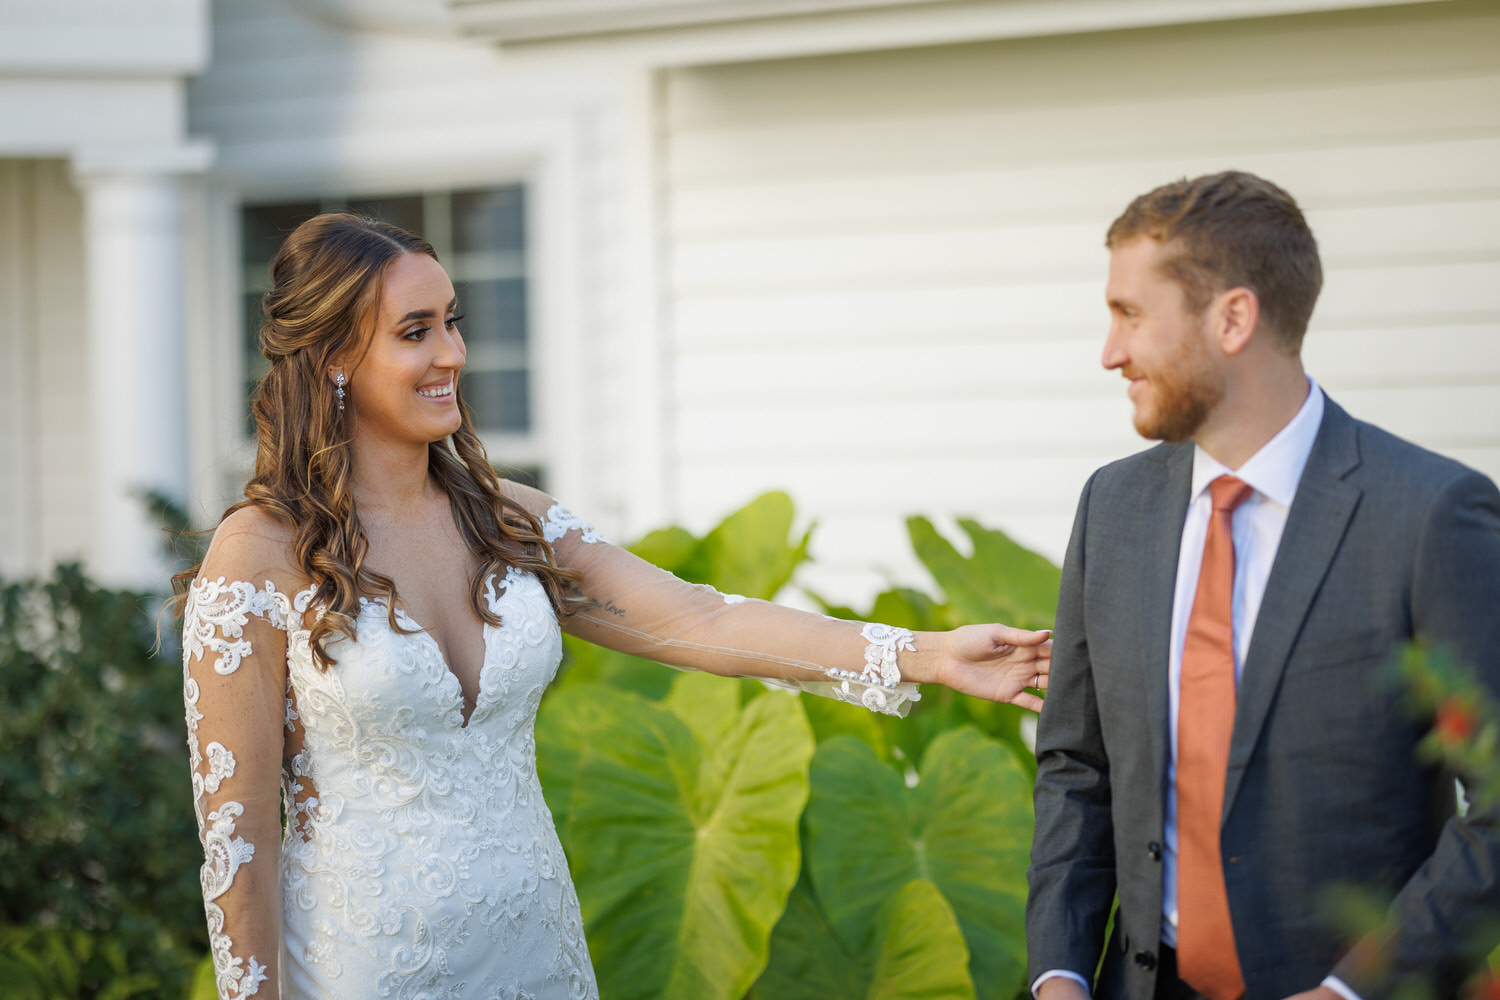 Bride in a lace dress smiling at the groom in a suit, pinning a flower on his lapel outdoors during their wedding photography session, with a white house in the background.